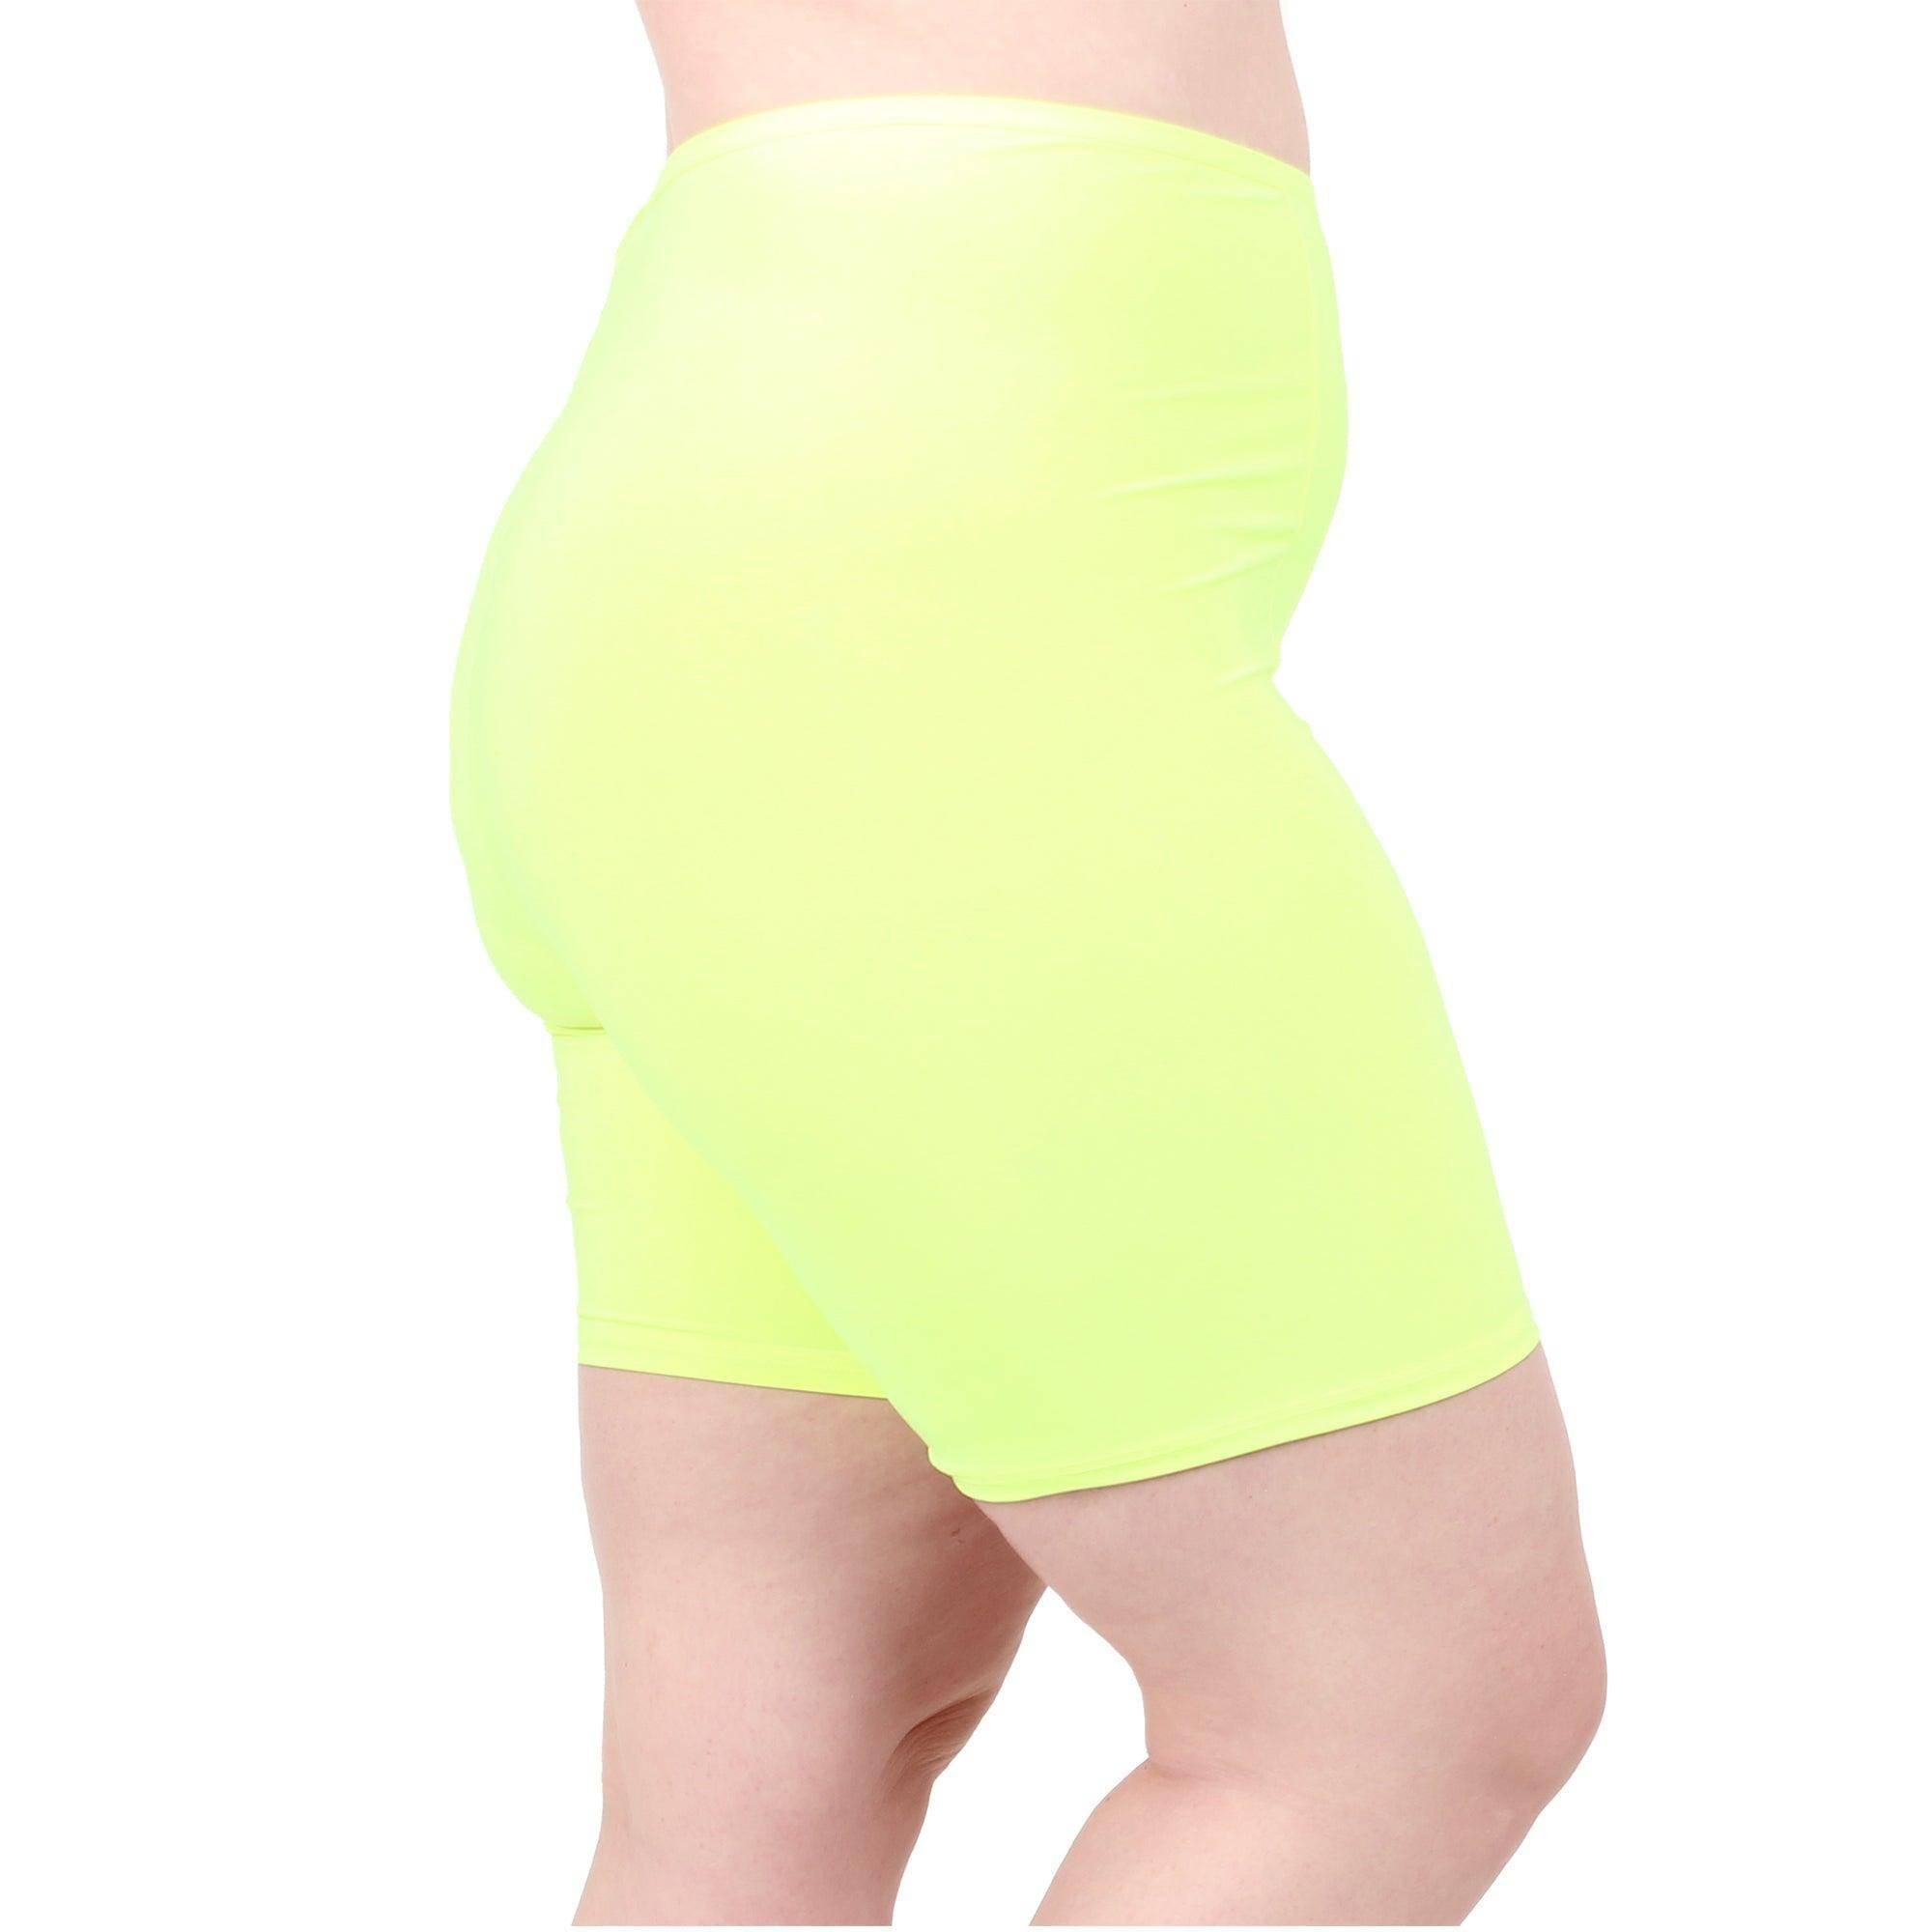 Undersummers Classic Shortlette, Thigh Anti Chafing Shorts Women, Slip  Shorts for Women Under Dress, Undergarments for Dresses (Small, Beige) at   Women's Clothing store